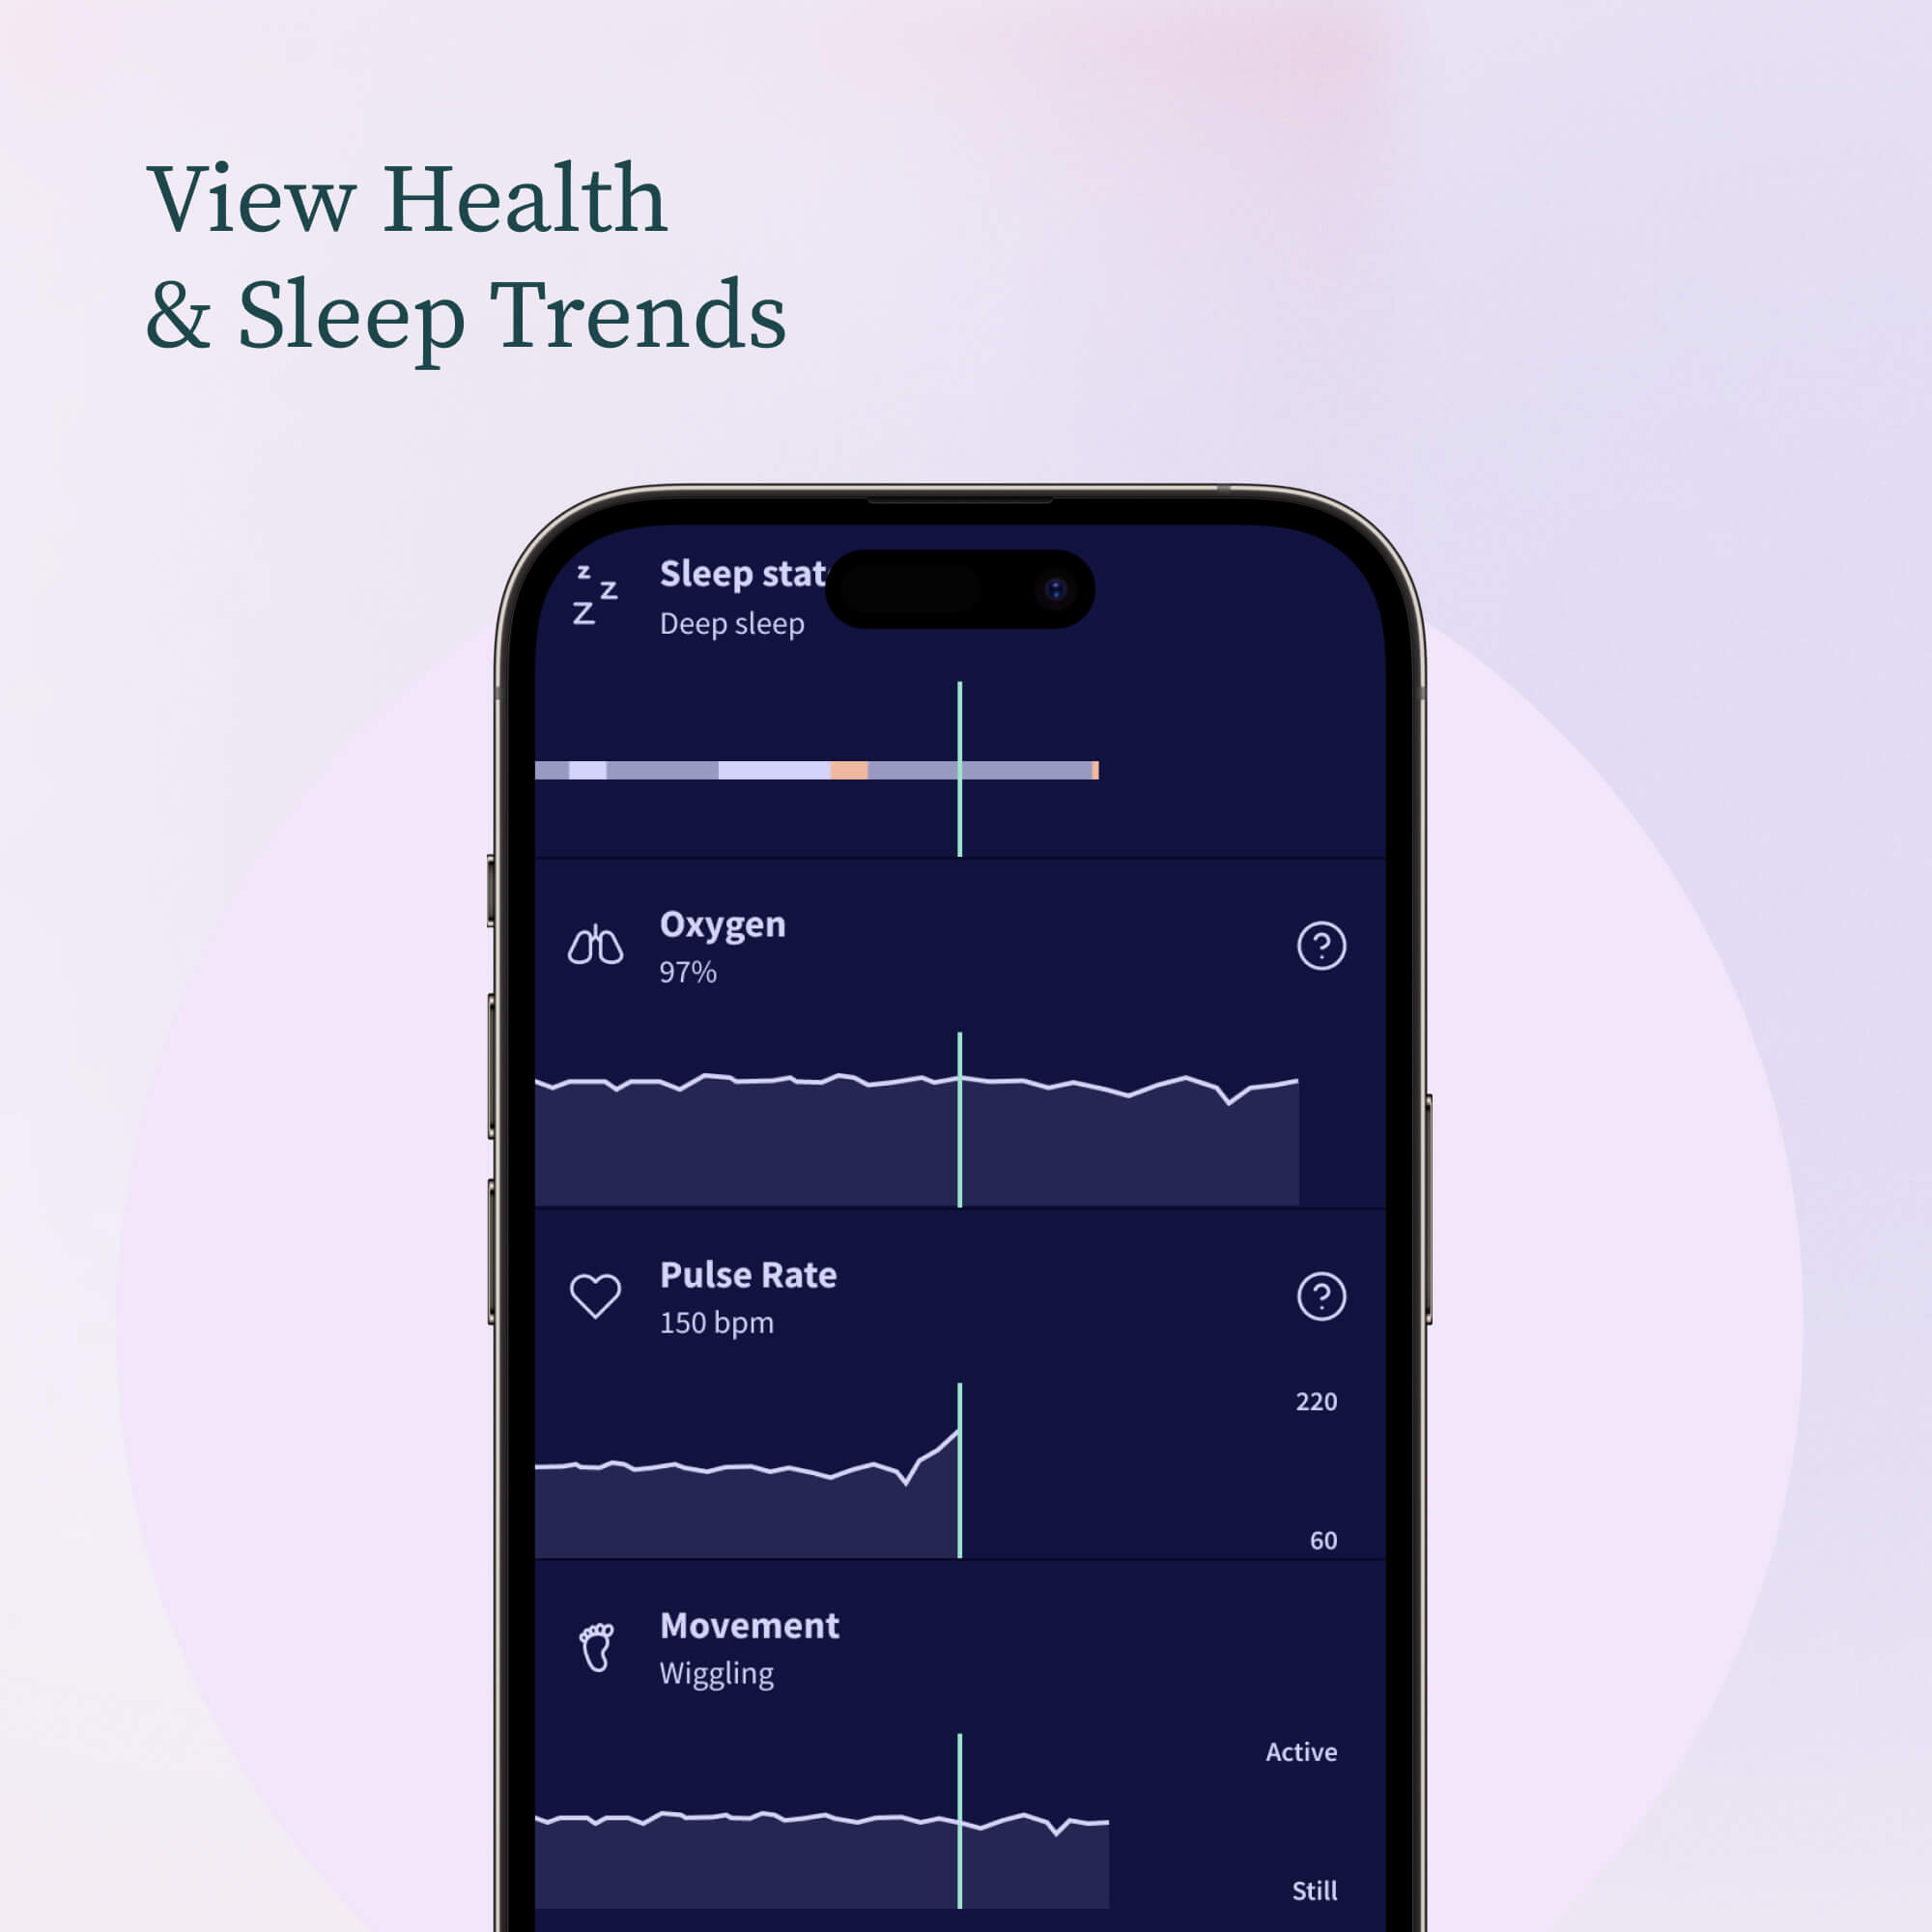 View health and sleep trends